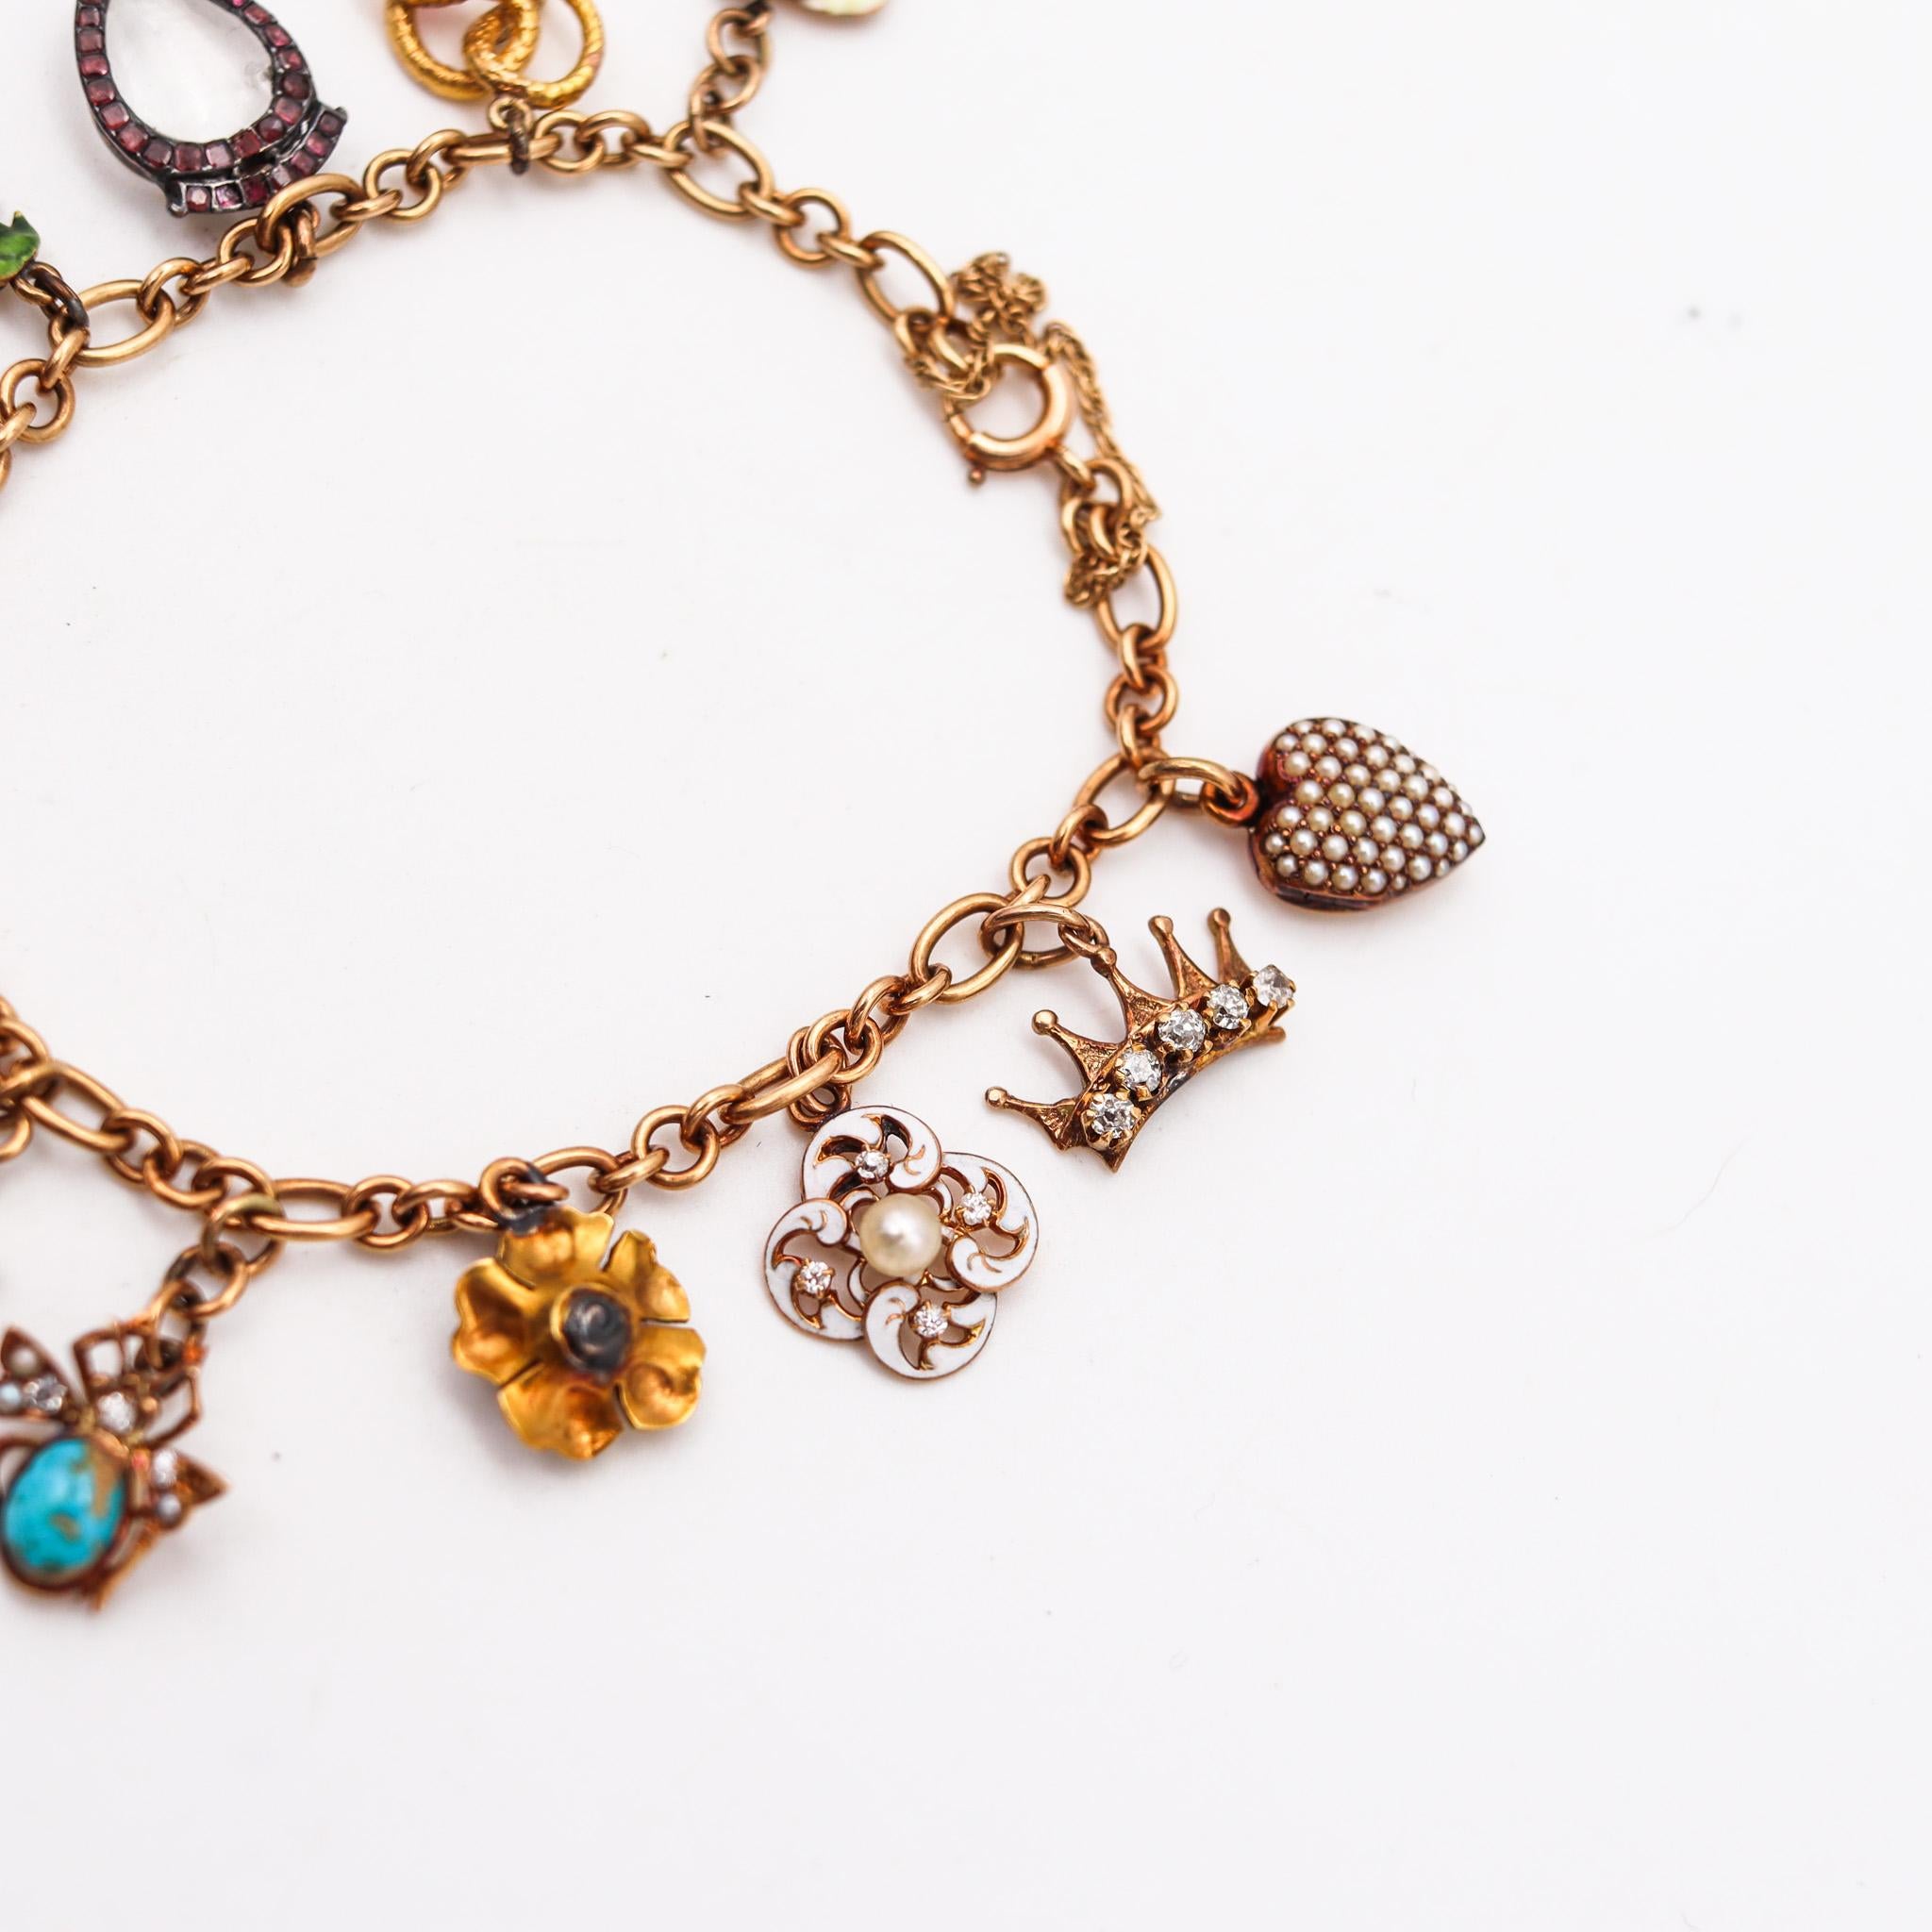 Women's Art Nouveau 1910 Charms Bracelet In 14Kt Gold With Multi Gemstones And Enamels For Sale